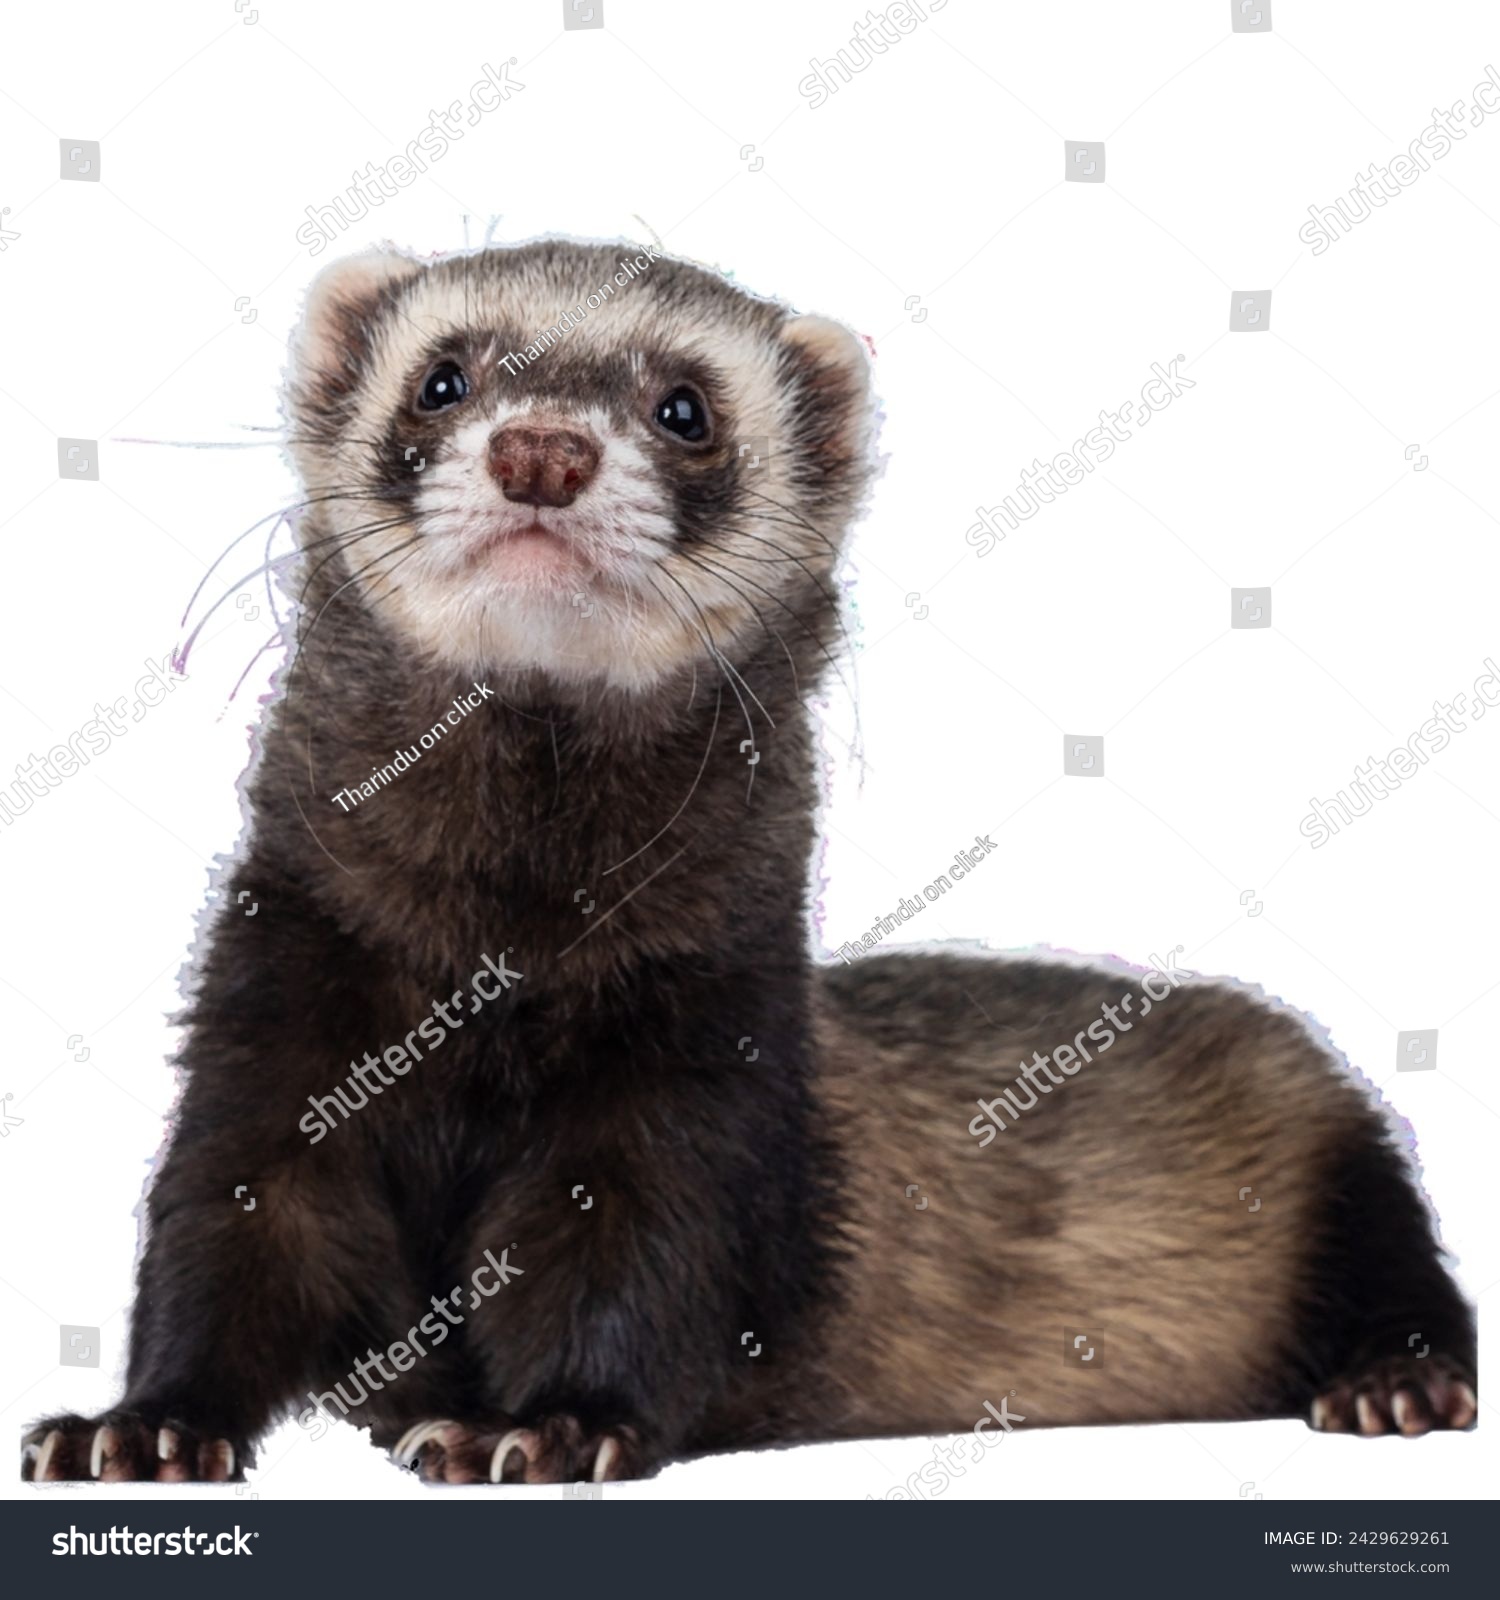 Black-footed ferret isolated on white background.The black-footed ferret also known as the American polecat or prairie dog hunter, is a species of mustelid native to central North America. #2429629261